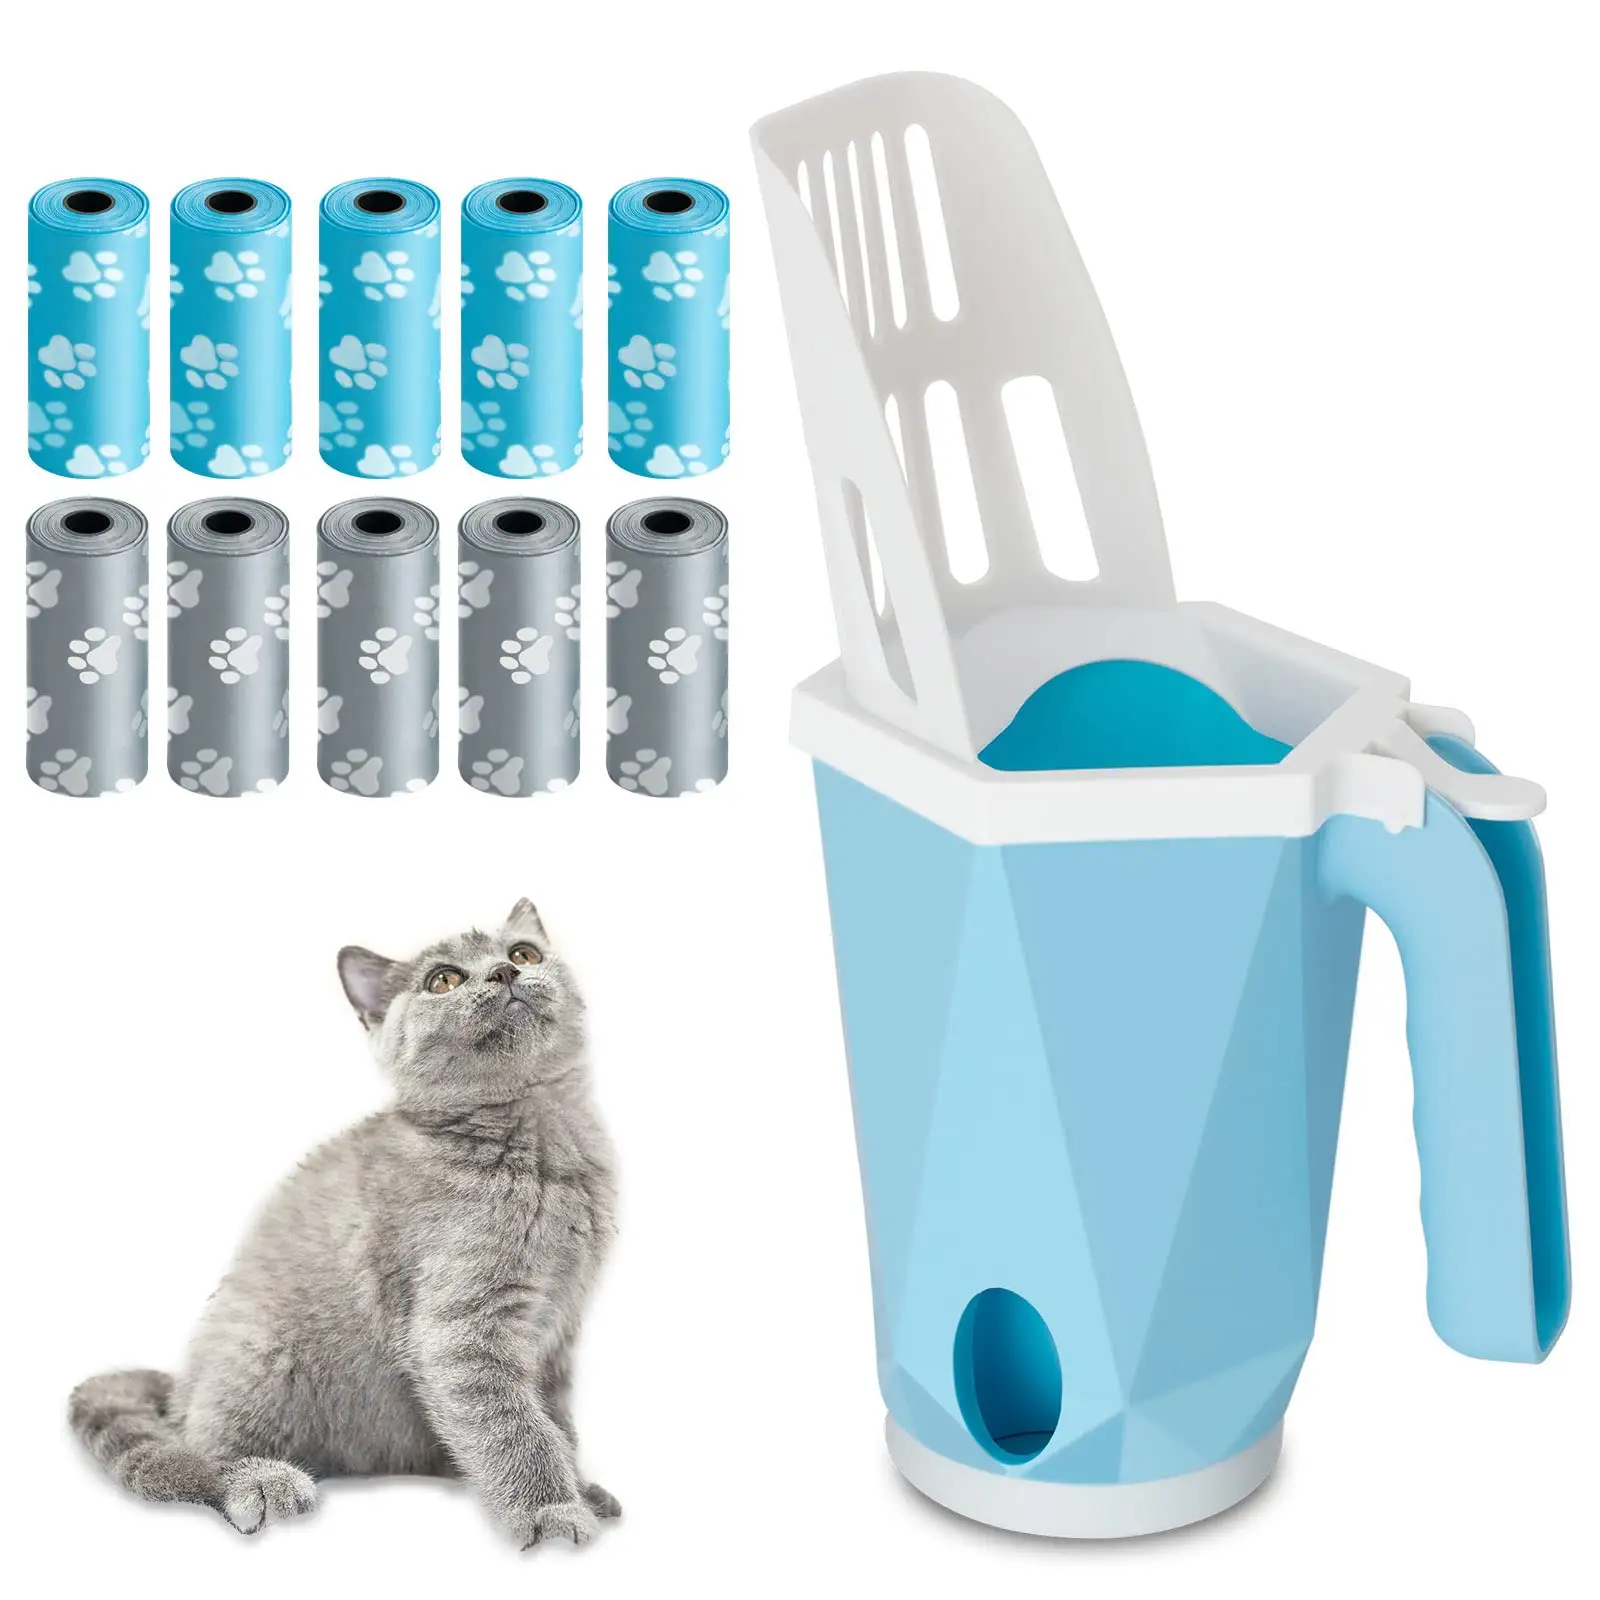 Pet Supplie Cat Litter Shovel with Waste Bags Self Cleaning dog Litter Scooper Portable Cat Litter Box Cleaning Tool